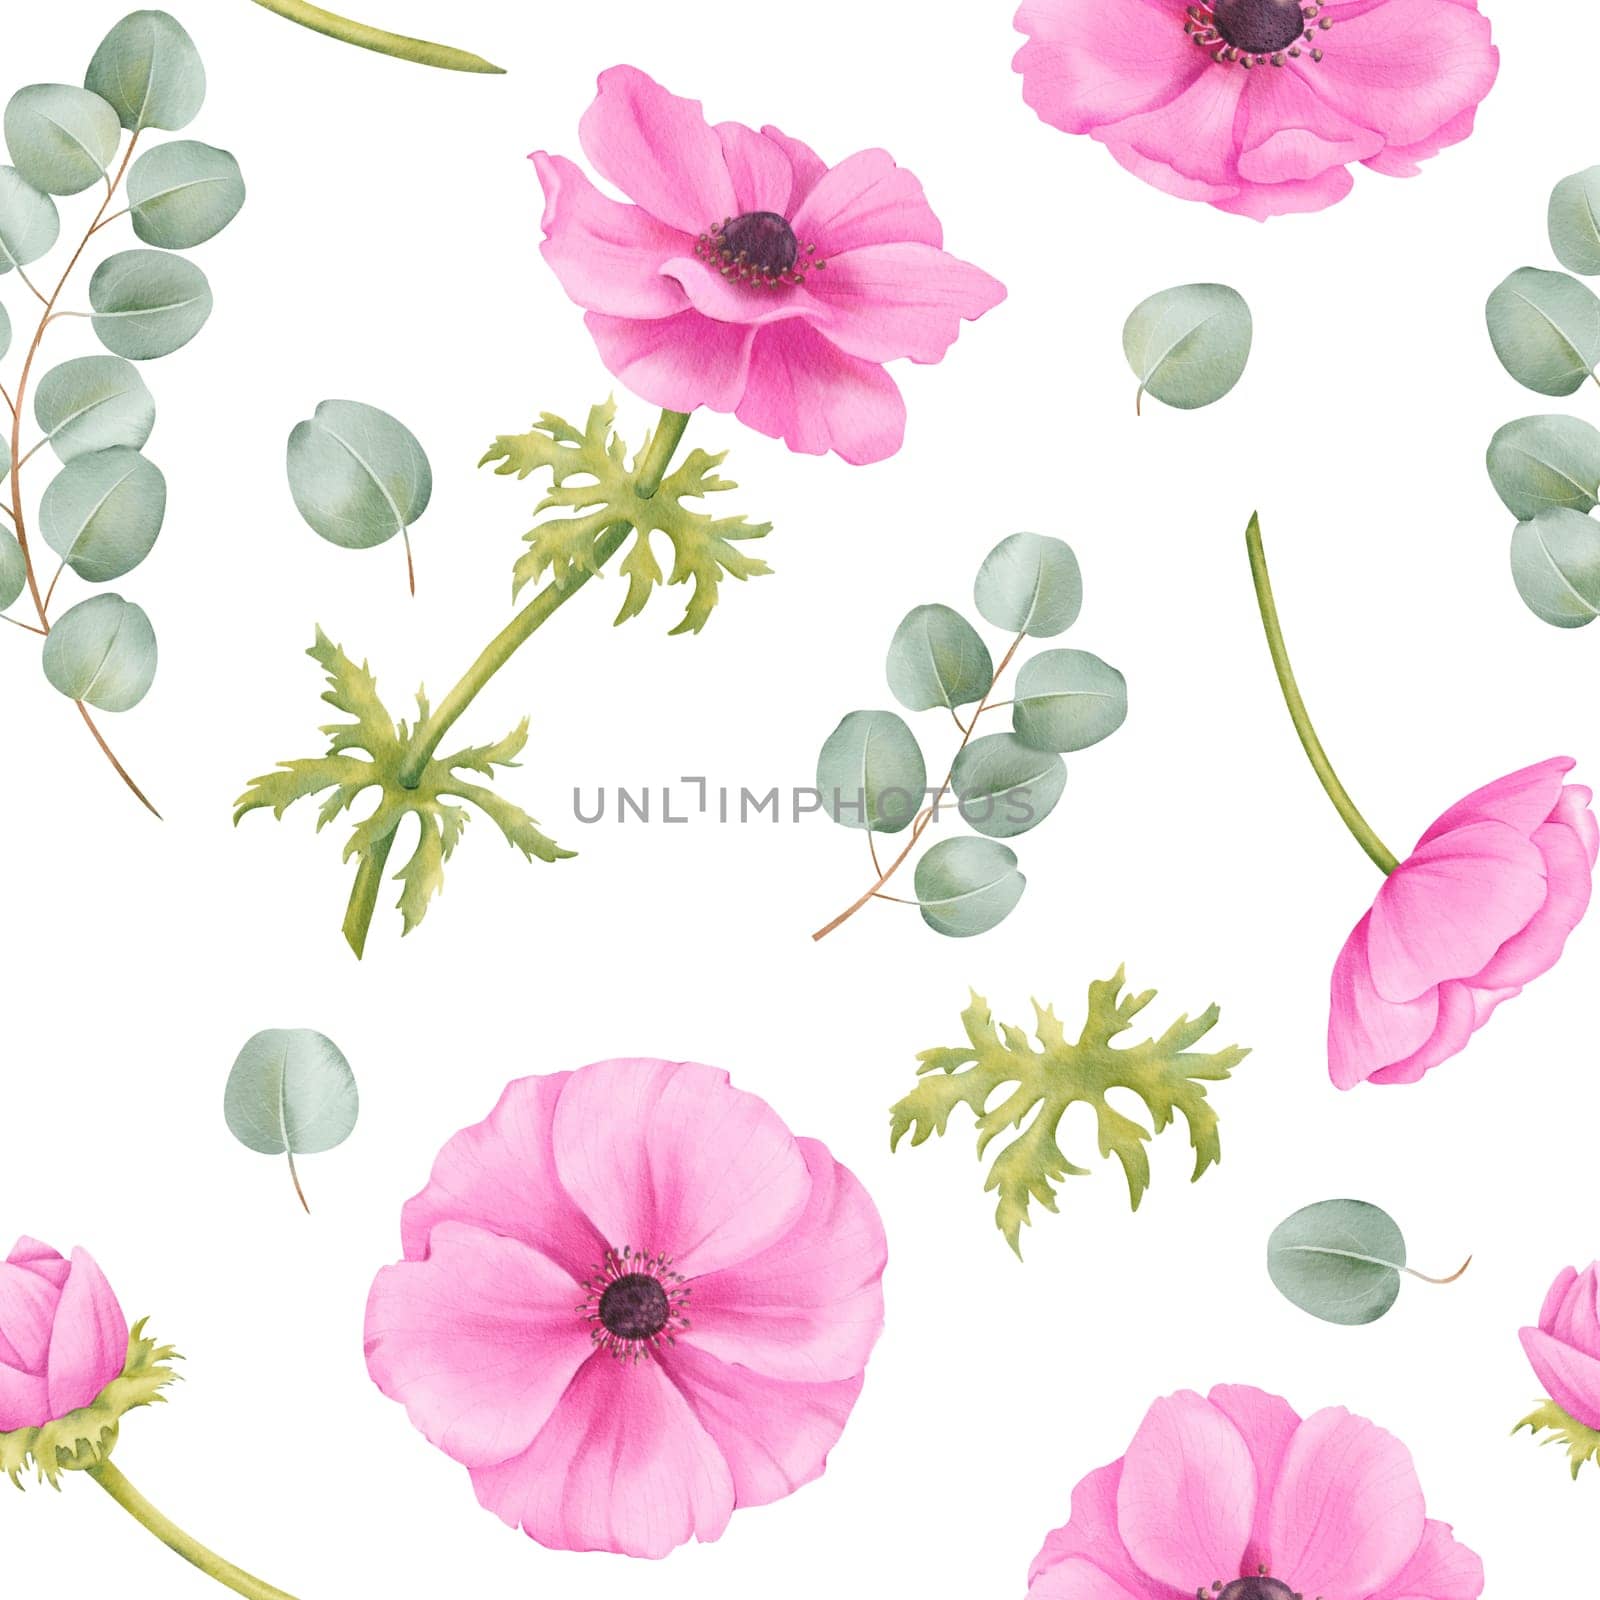 Seamless pattern. pink watercolor anemone blooms, lush green foliage, and eucalyptus leaves. Ideal for enhancing wallpapers, textiles, stationery, and packaging.